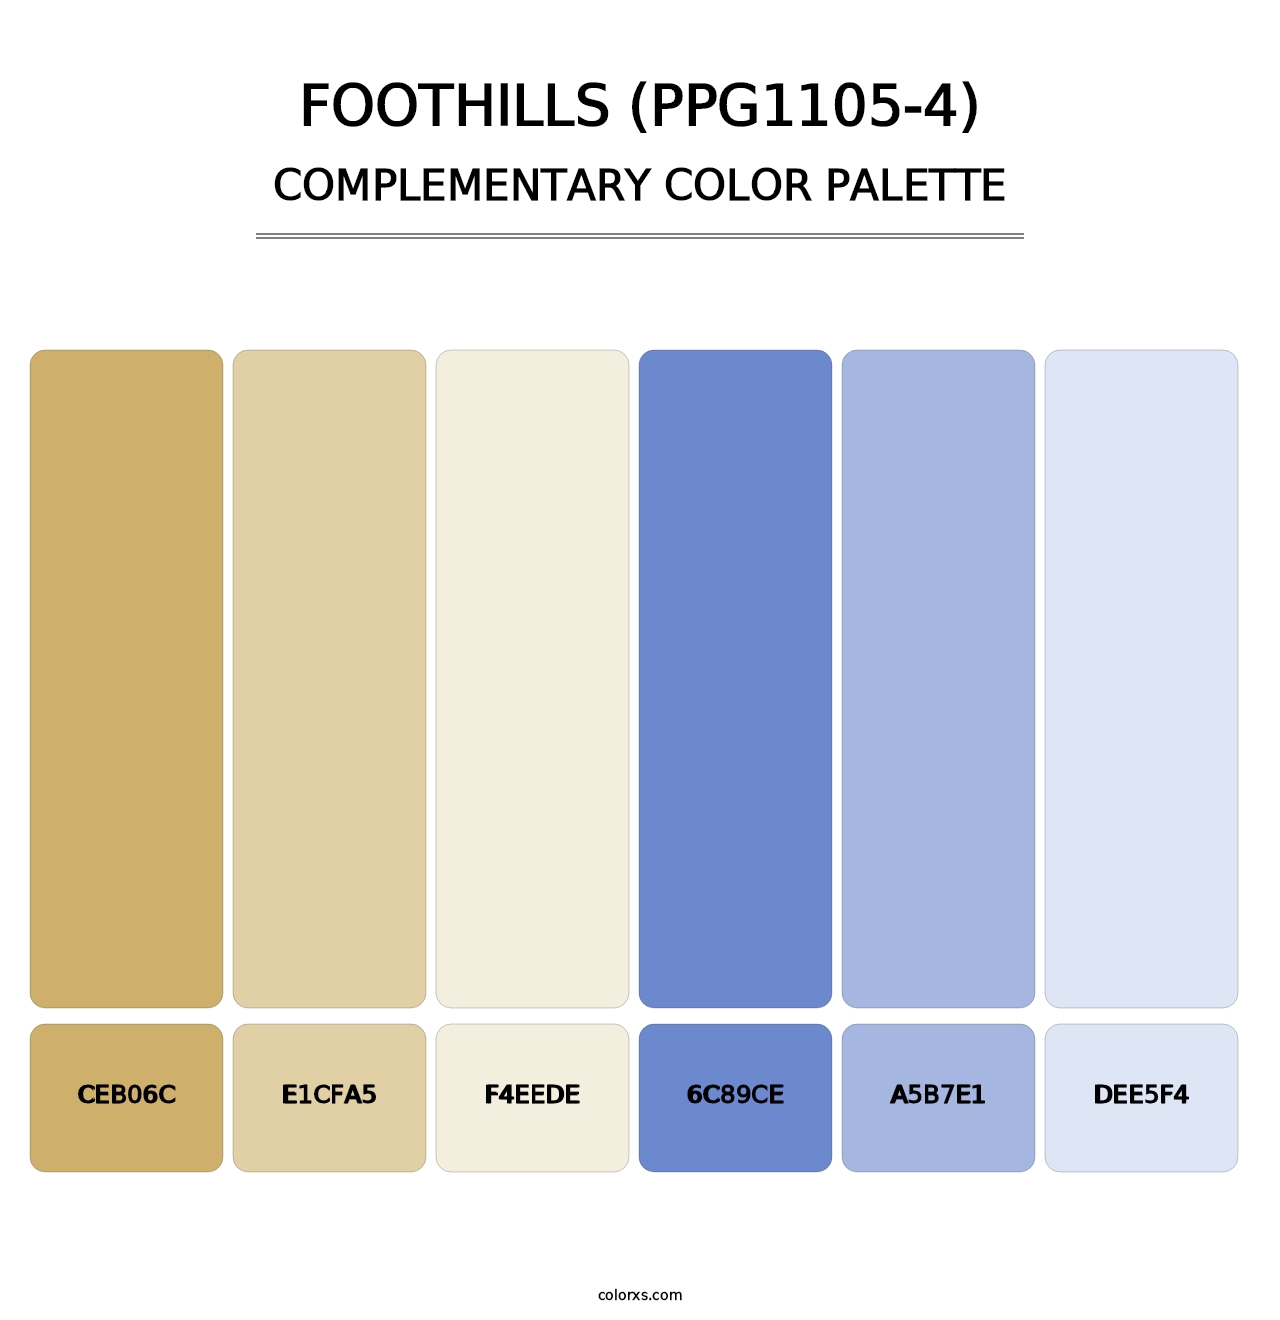 Foothills (PPG1105-4) - Complementary Color Palette